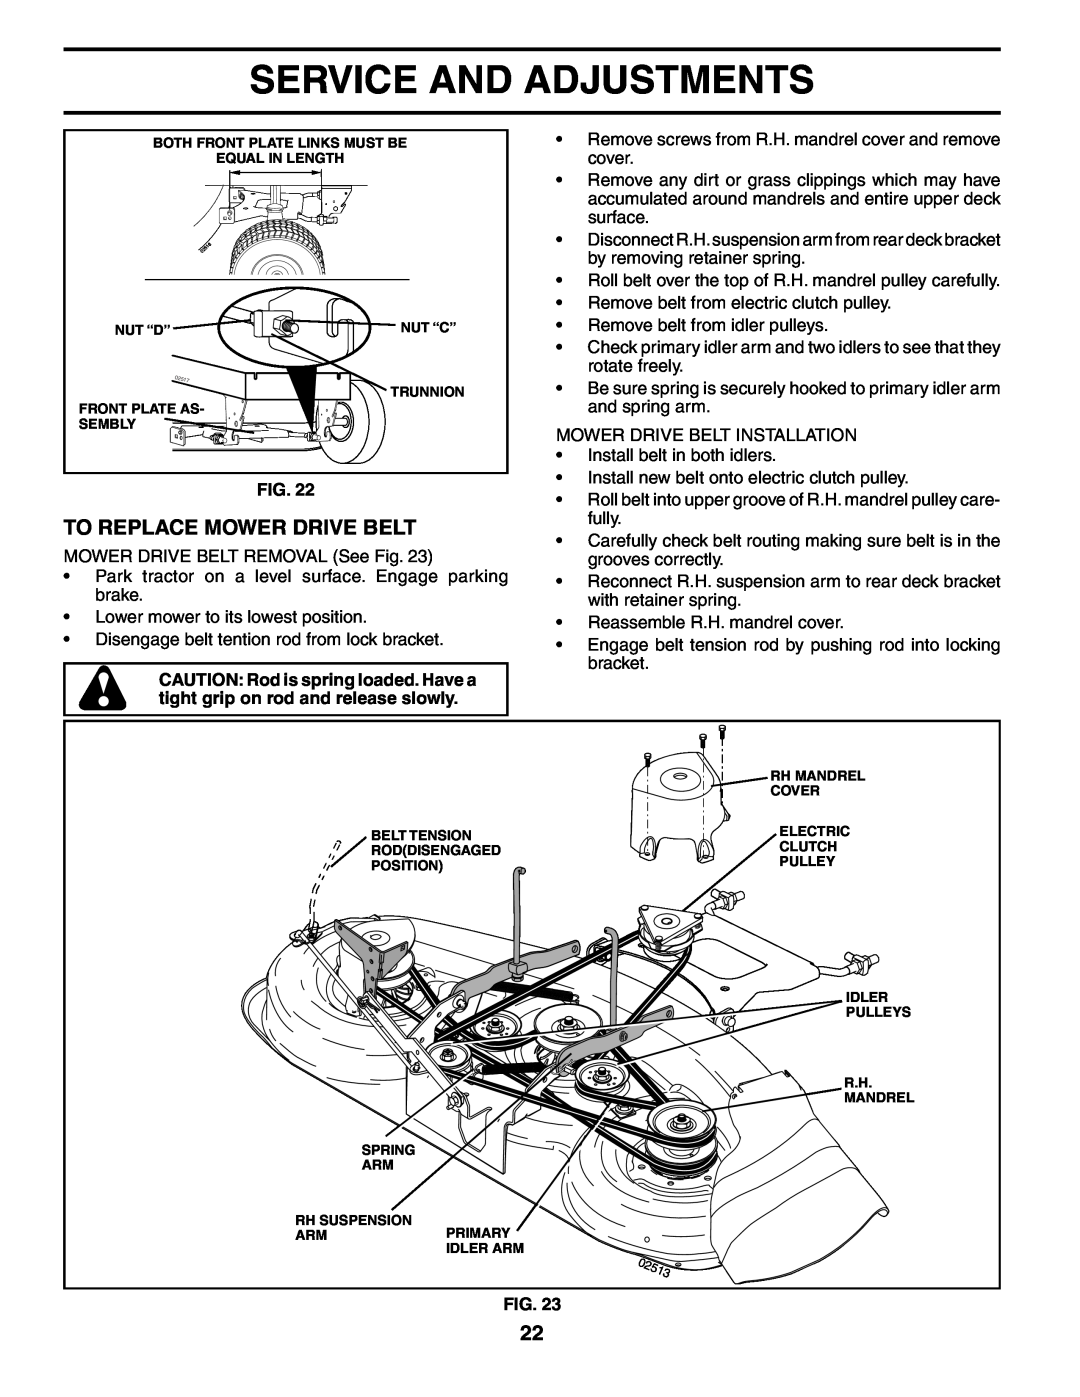 Poulan 195854 manual To Replace Mower Drive Belt, Service And Adjustments 